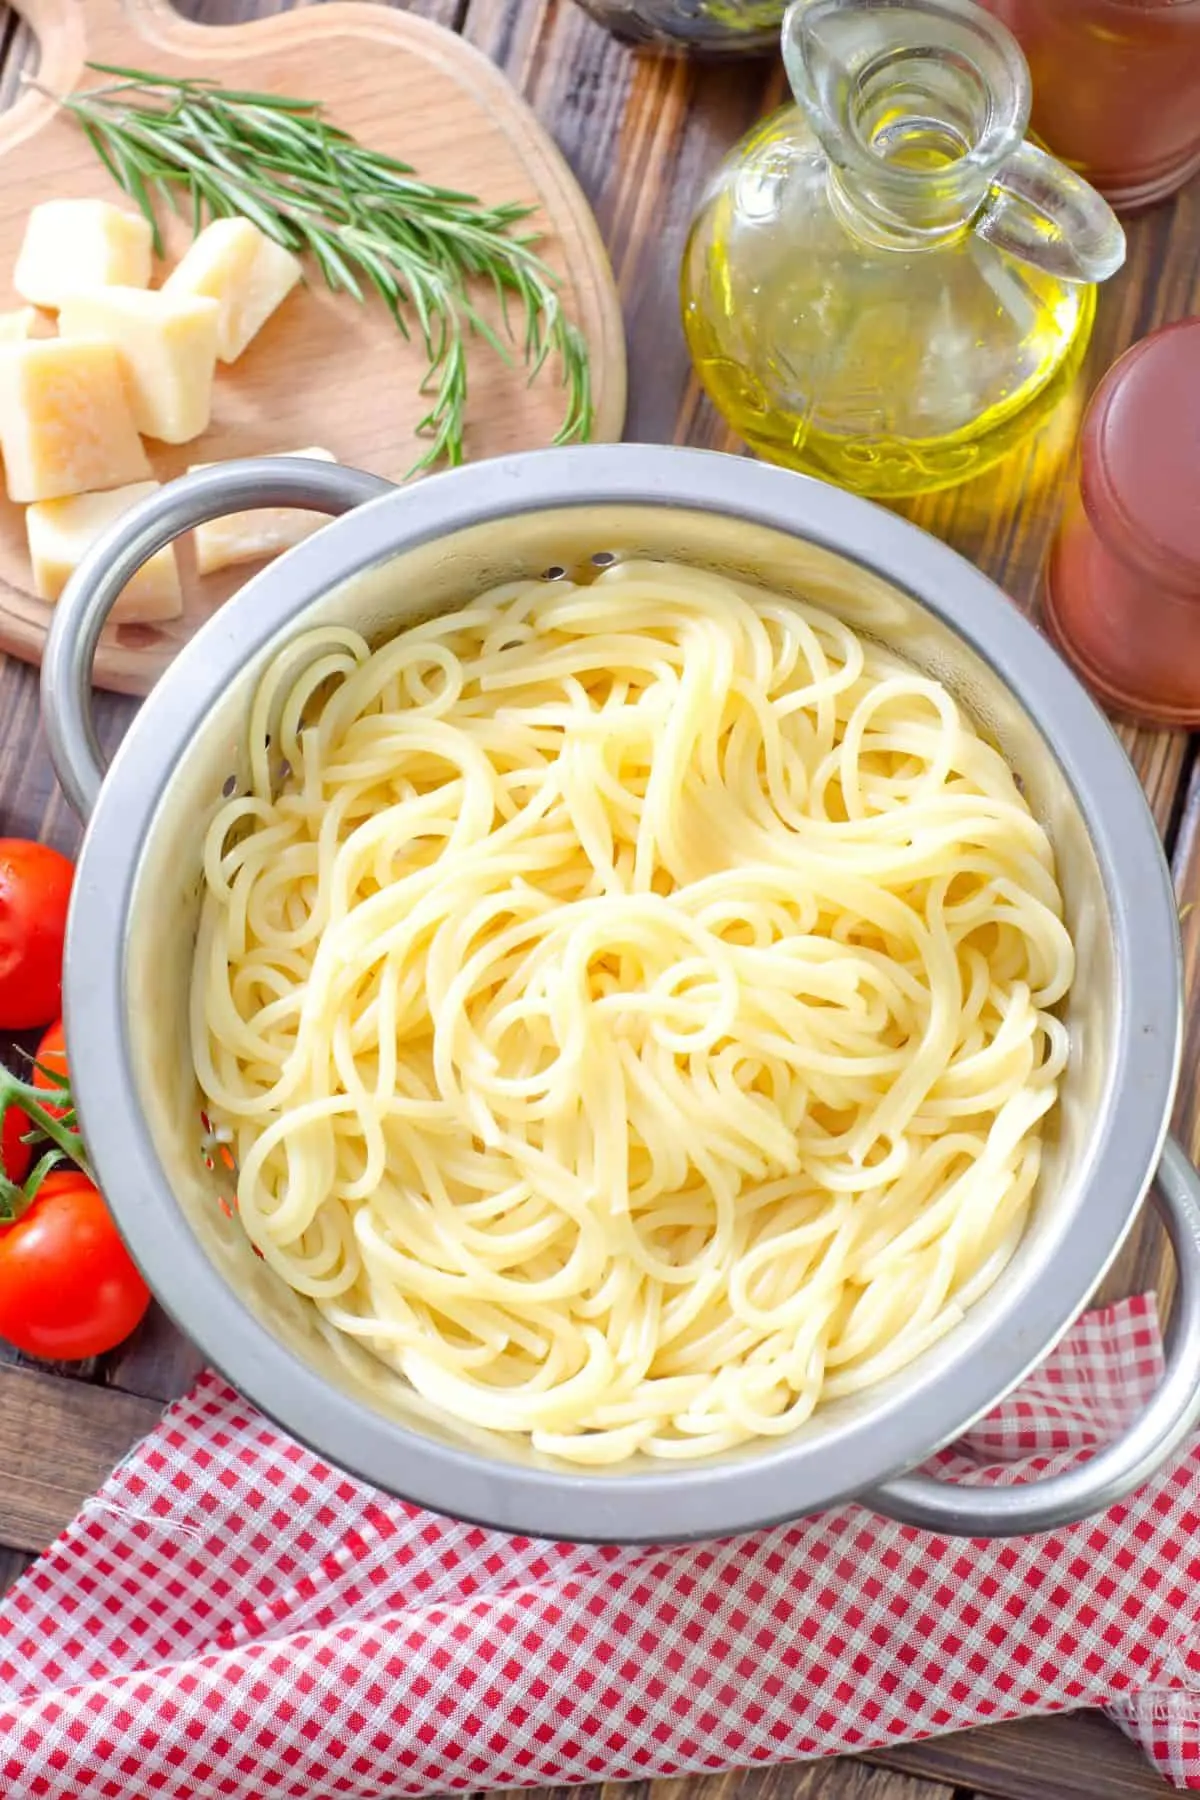 starch molecules help the  pasta sauce stick to the noodle